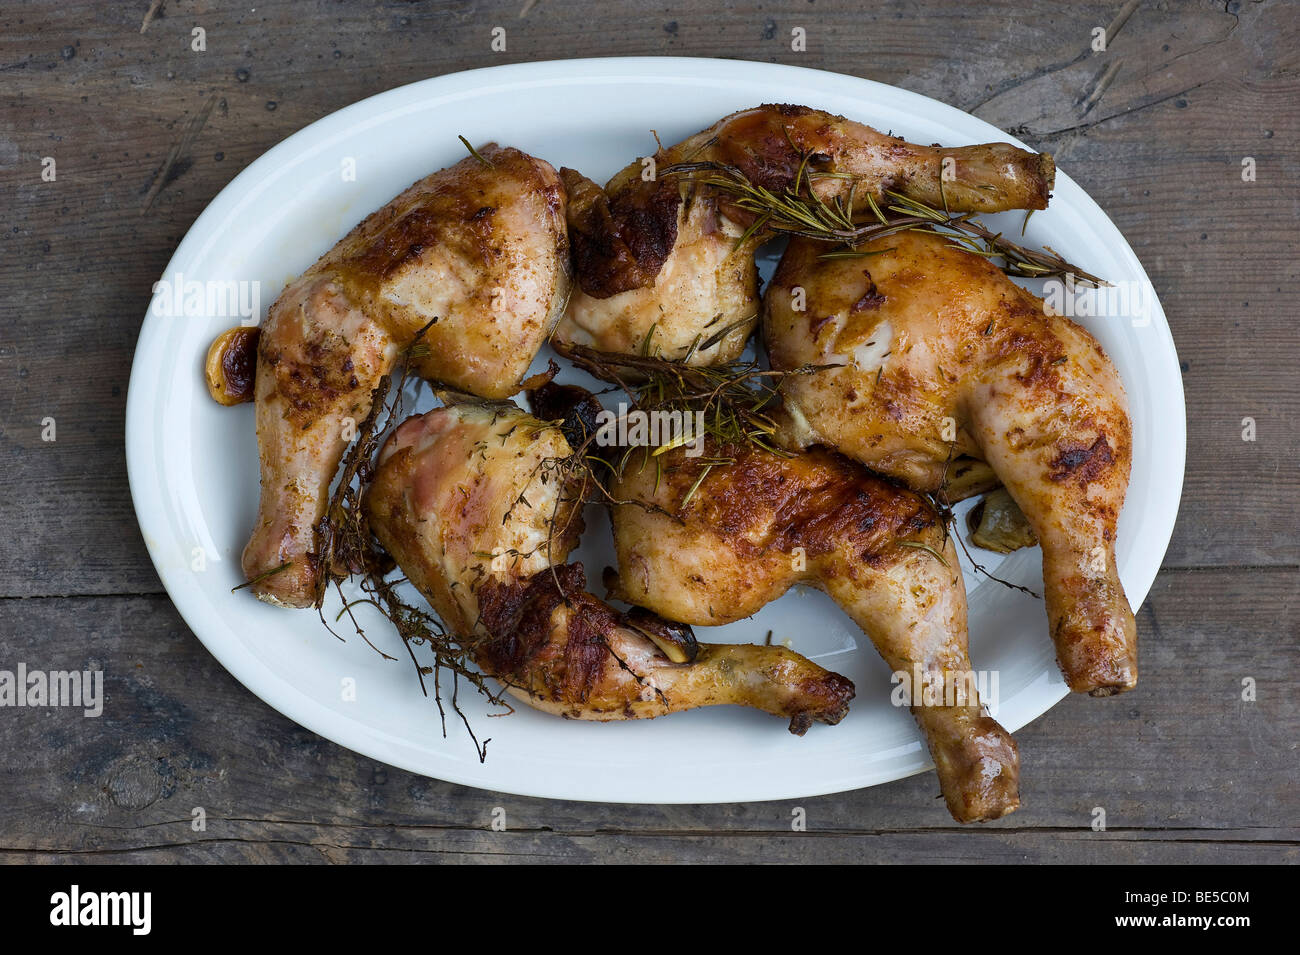 Grilled chicken legs with rosemary, thyme and garlic Stock Photo